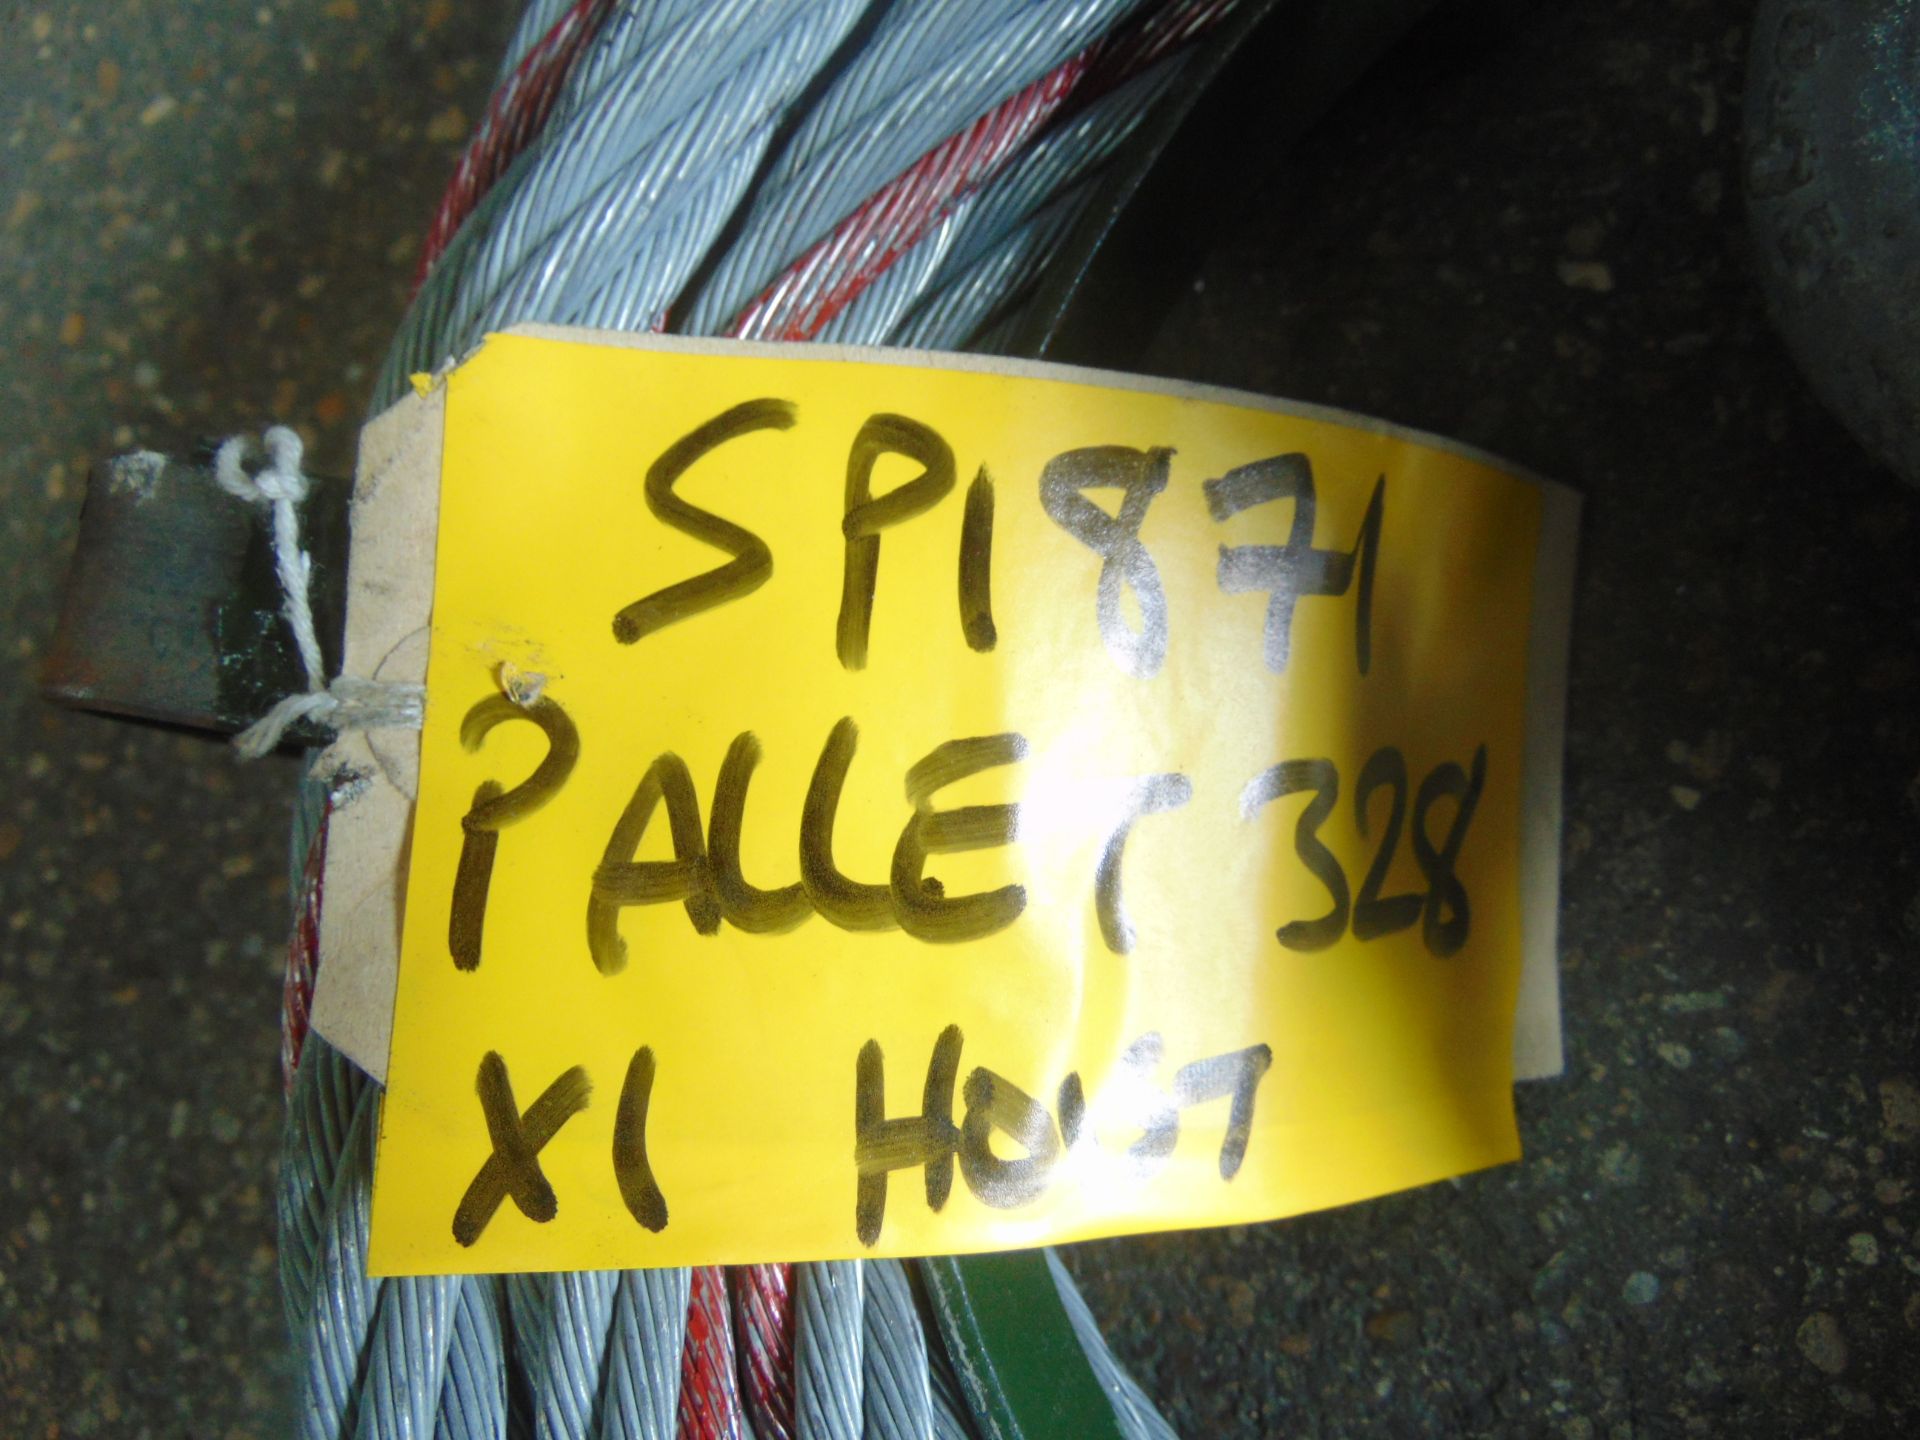 10m of 3T Wire Winch/Hoist Rope - Image 5 of 5